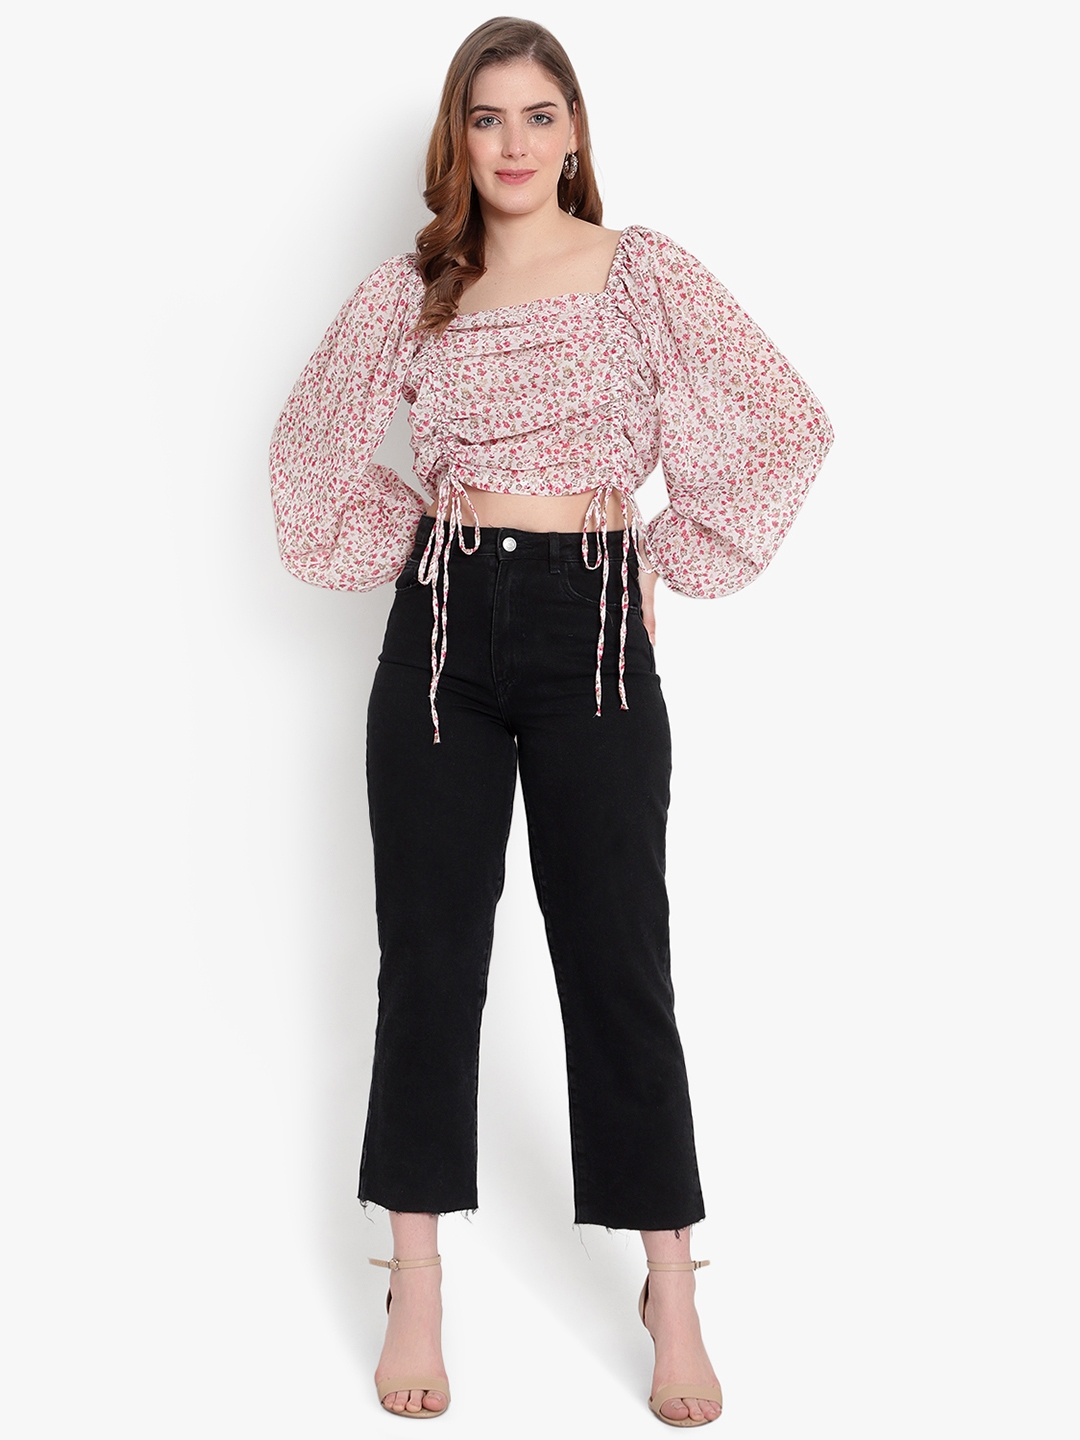 ANKLES Casual Solid White Multi Color Puffed Sleeves Crop Top 